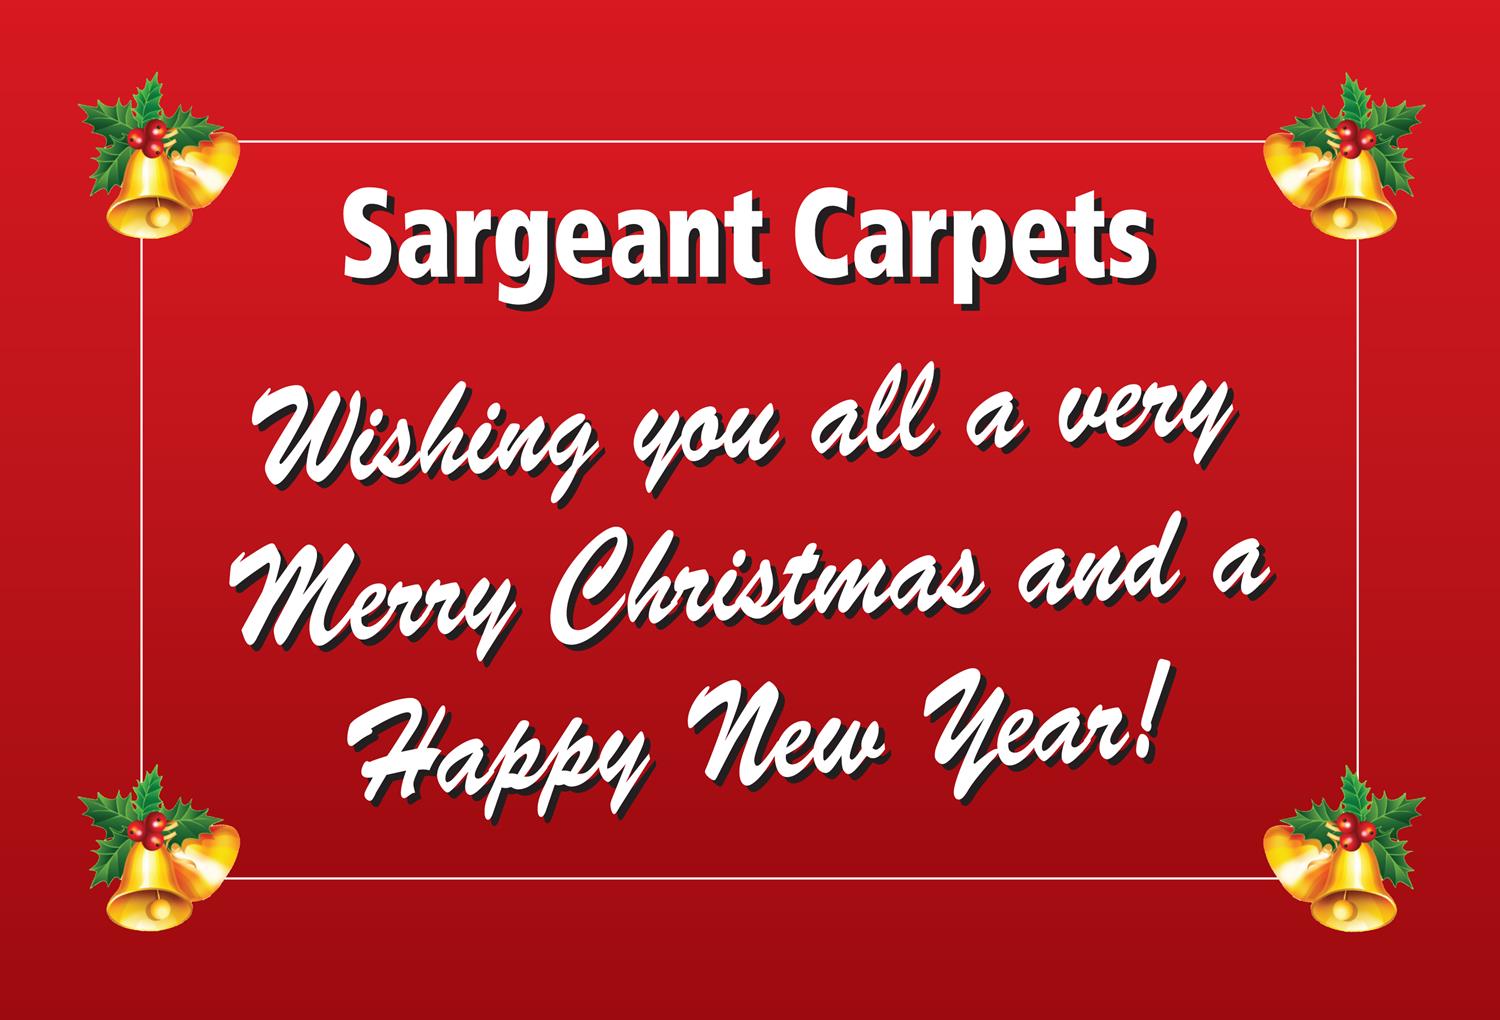 A Christmas message on a red background from Craig Sargeant at Sargeant Carpets in Bognor Regis